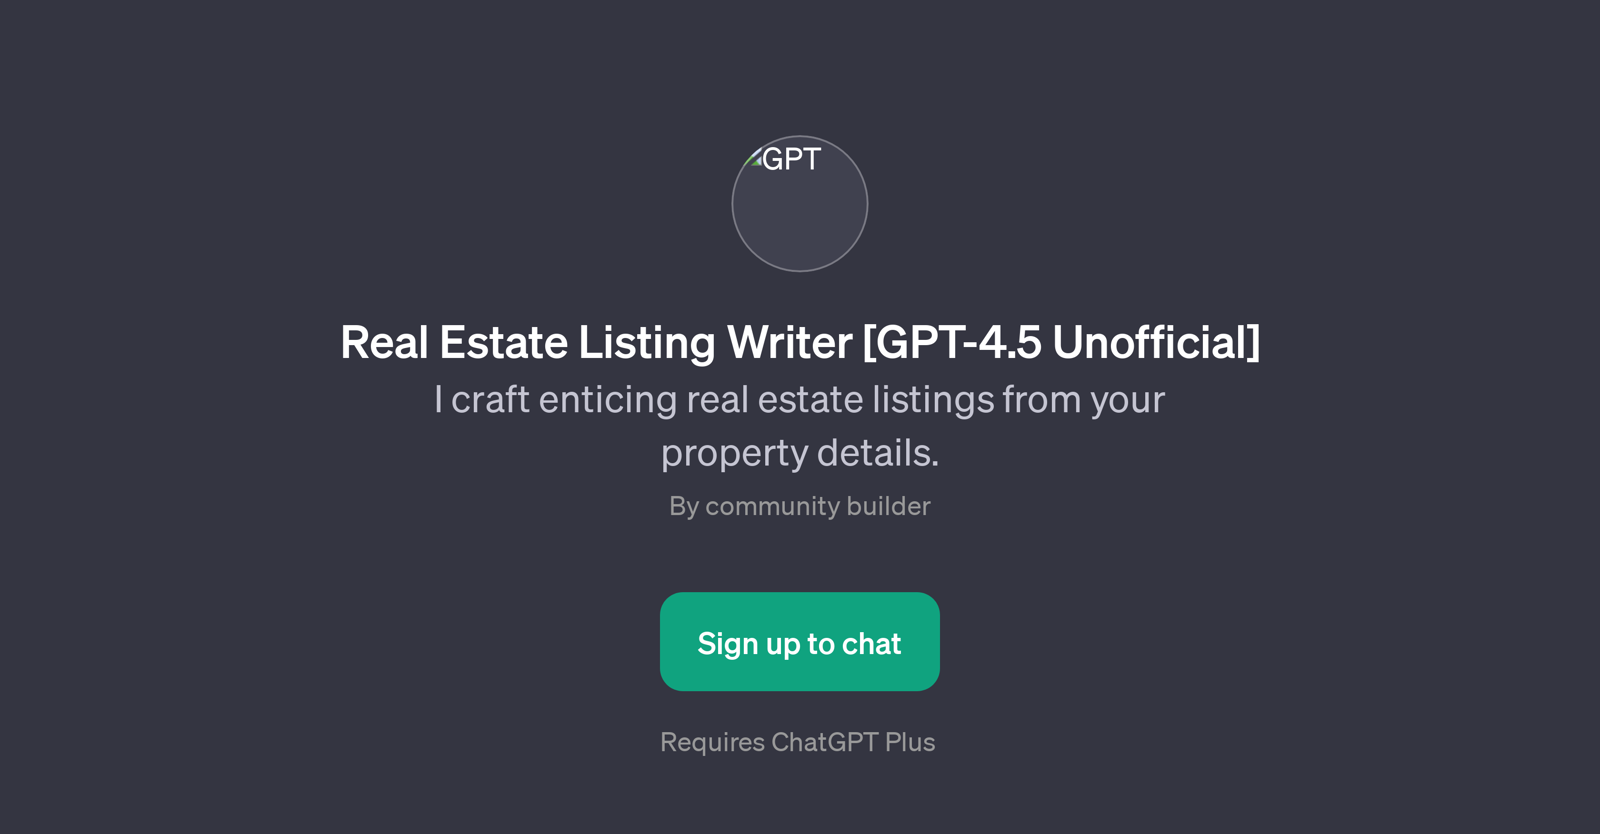 Real Estate Listing Writer [GPT-4.5 Unofficial] website